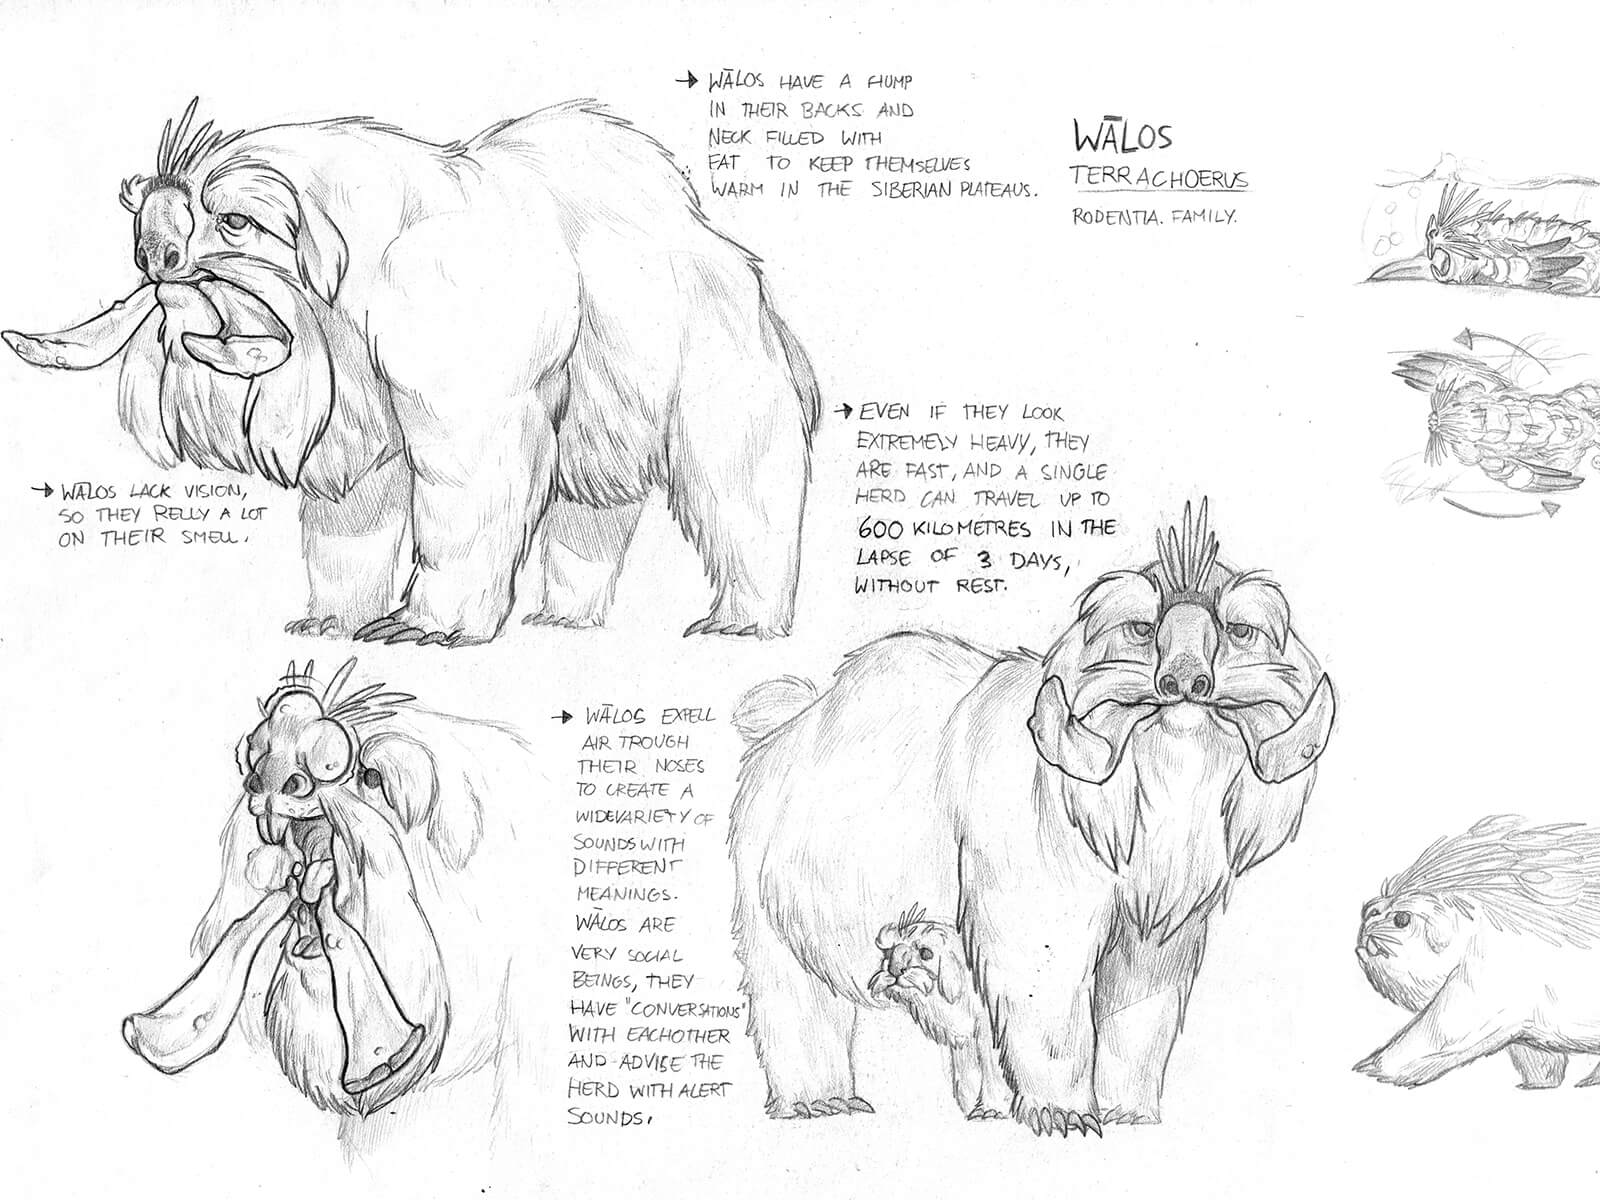 Black-and-white sketches of a fantastical white furry beast with features of a bear, dog, and boar as it stands and runs.